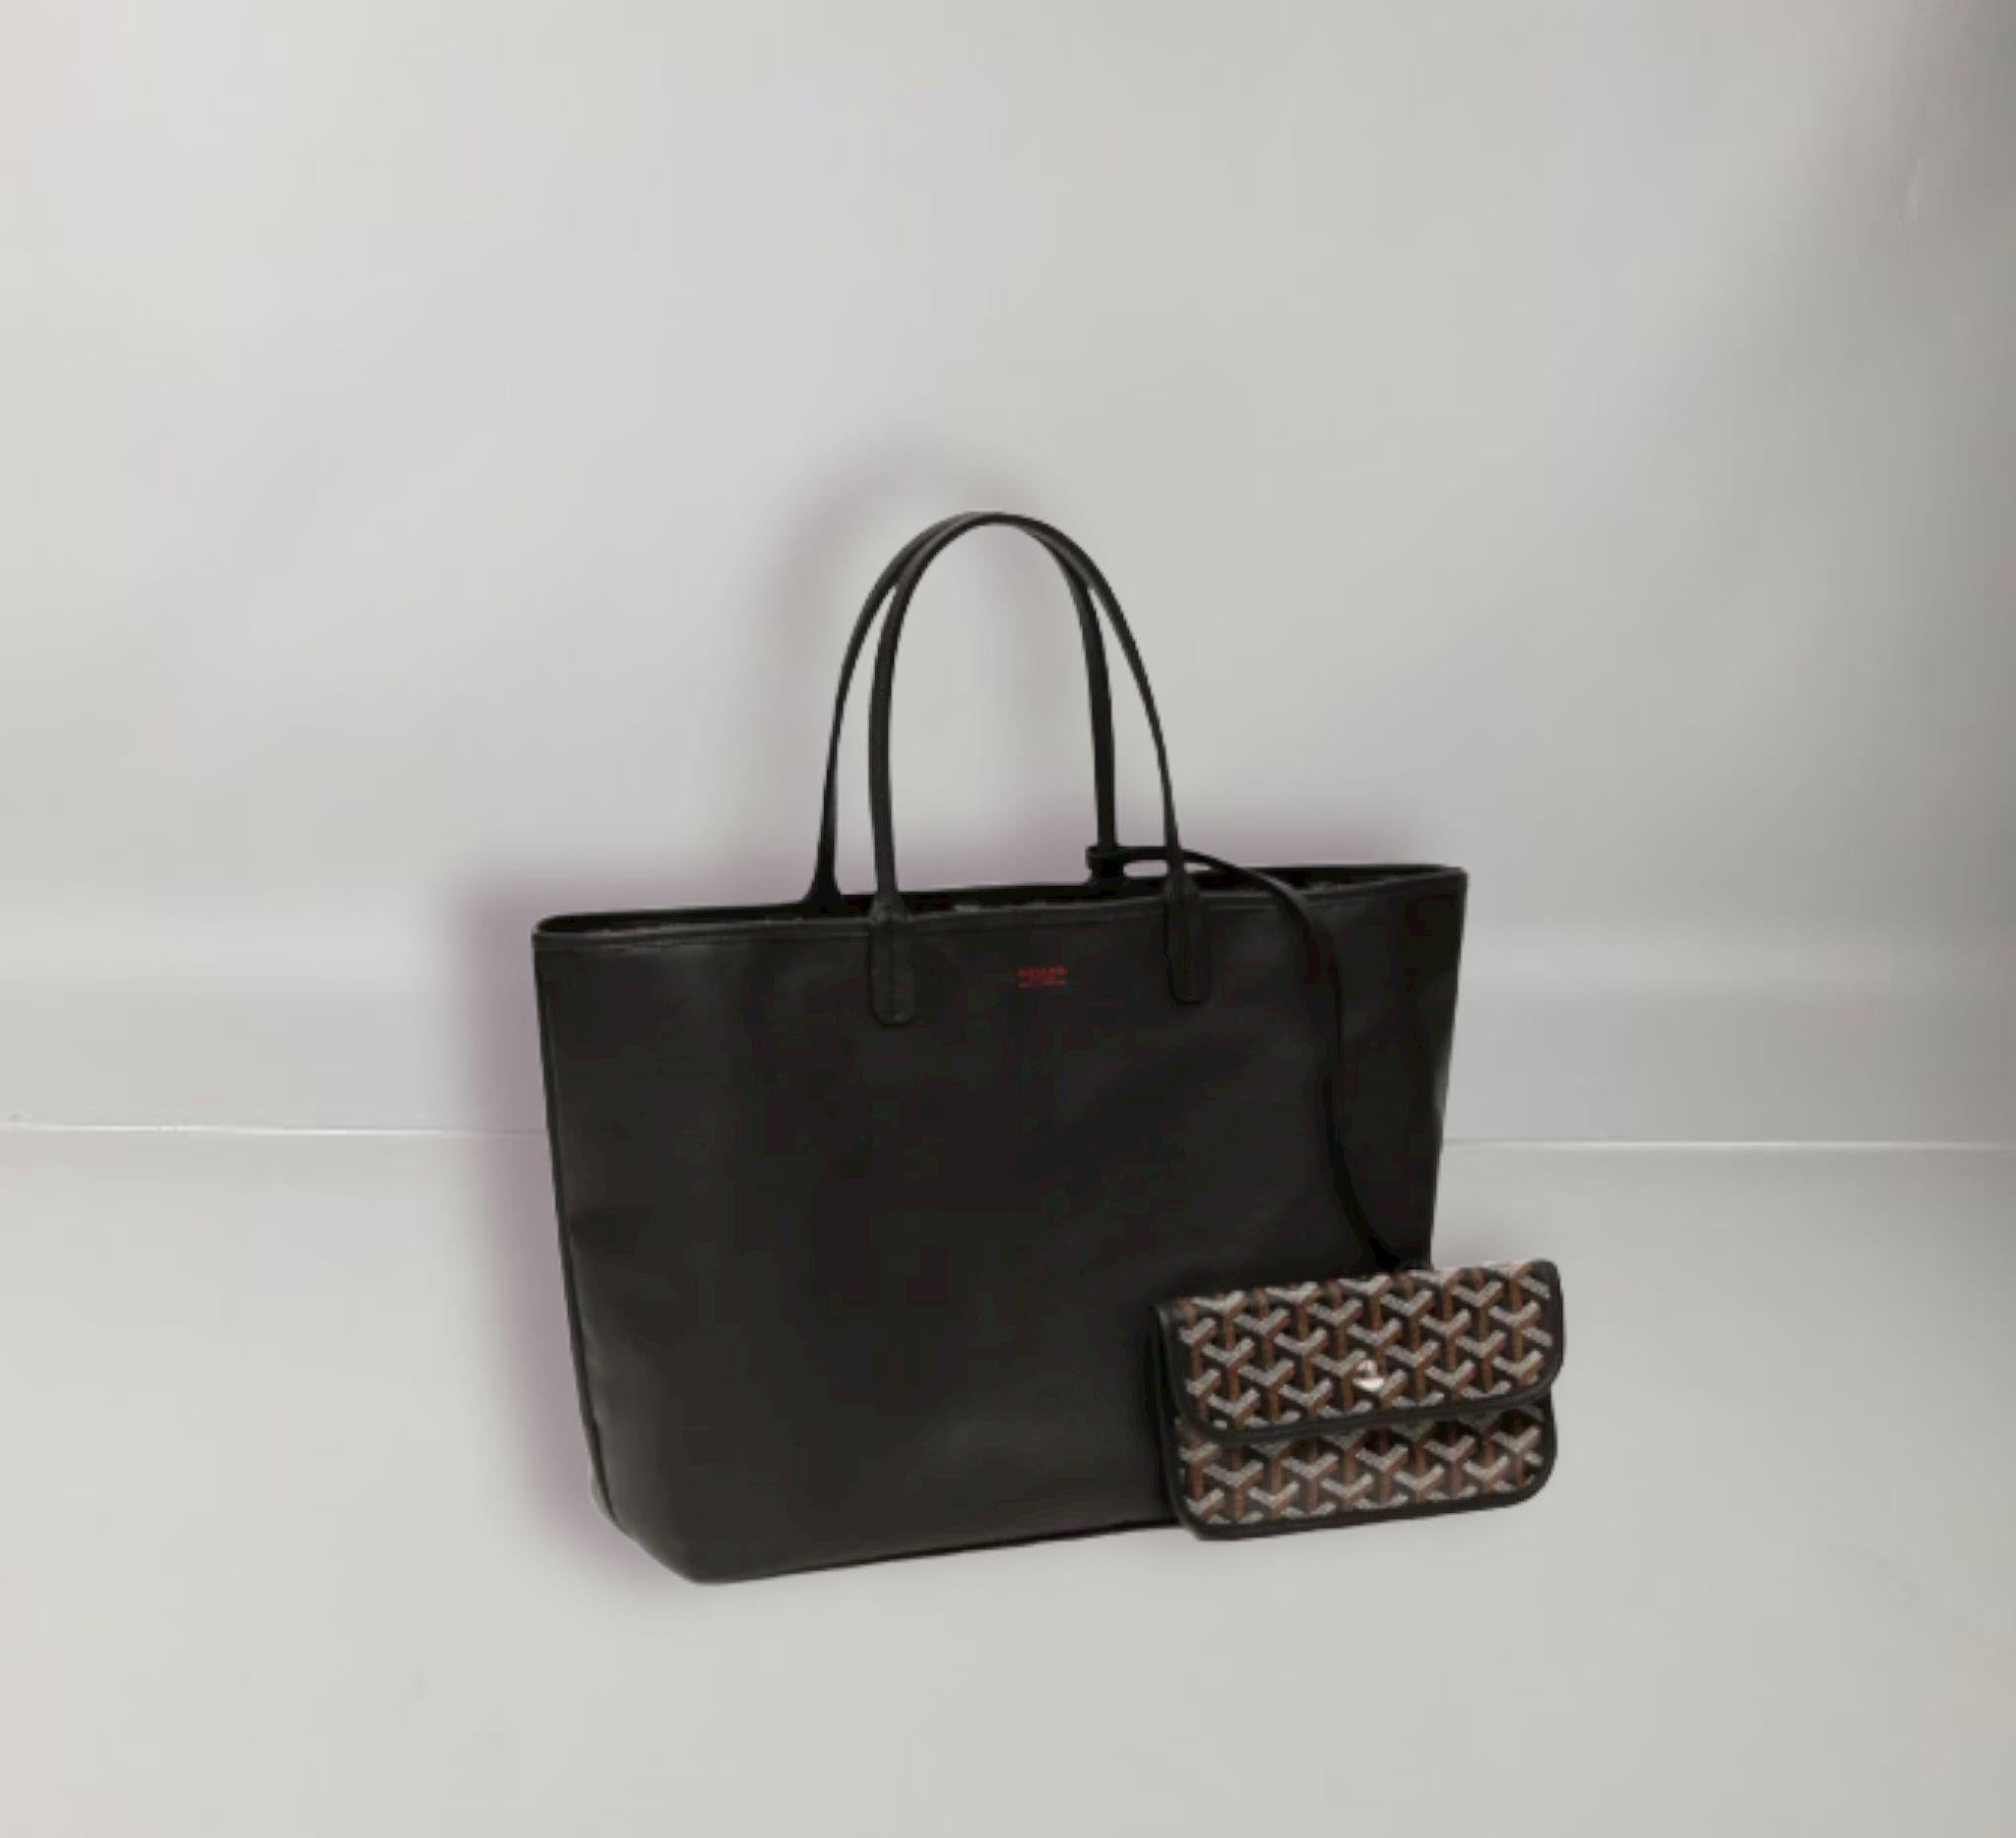 Goyard's Bag dont have cardboard box, it will  be ship with dust bag and authenticity card
The Anjou PM bag is a nod to our emblematic Saint Louis bag but in a leather version lined with Goyardine. It has two different styles and looks. Its handles